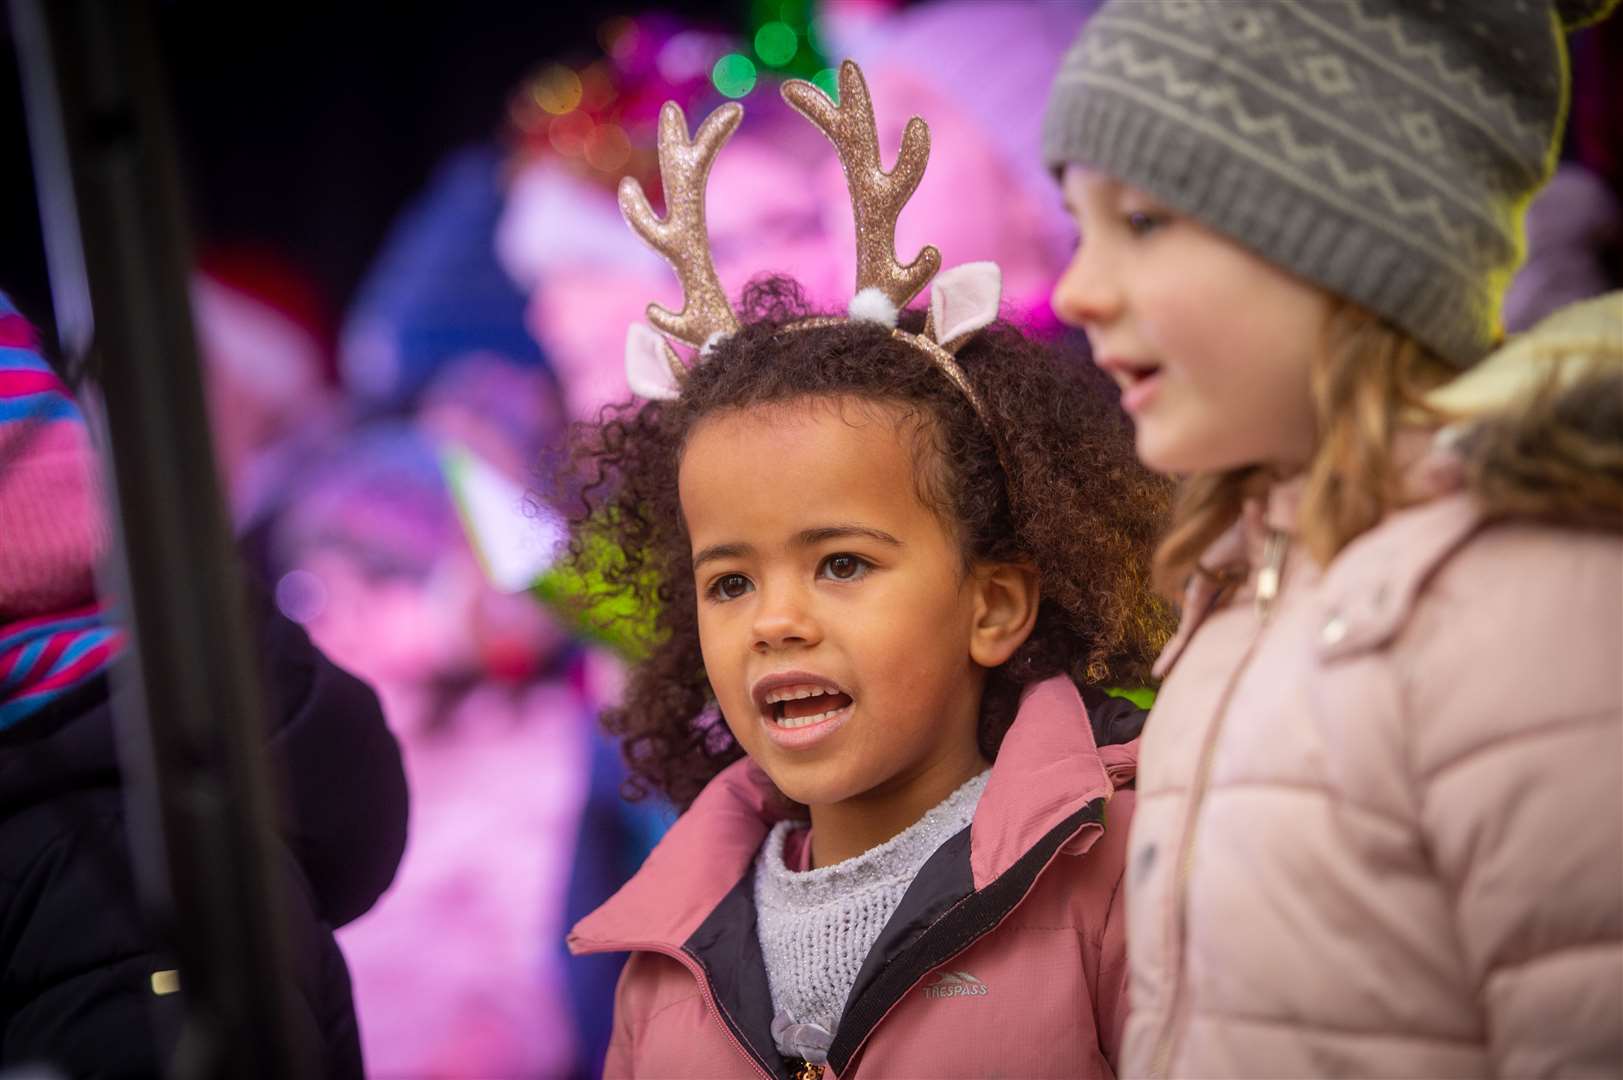 Local children sang Christmas songs for the crowds. Picture: Callum Mackay